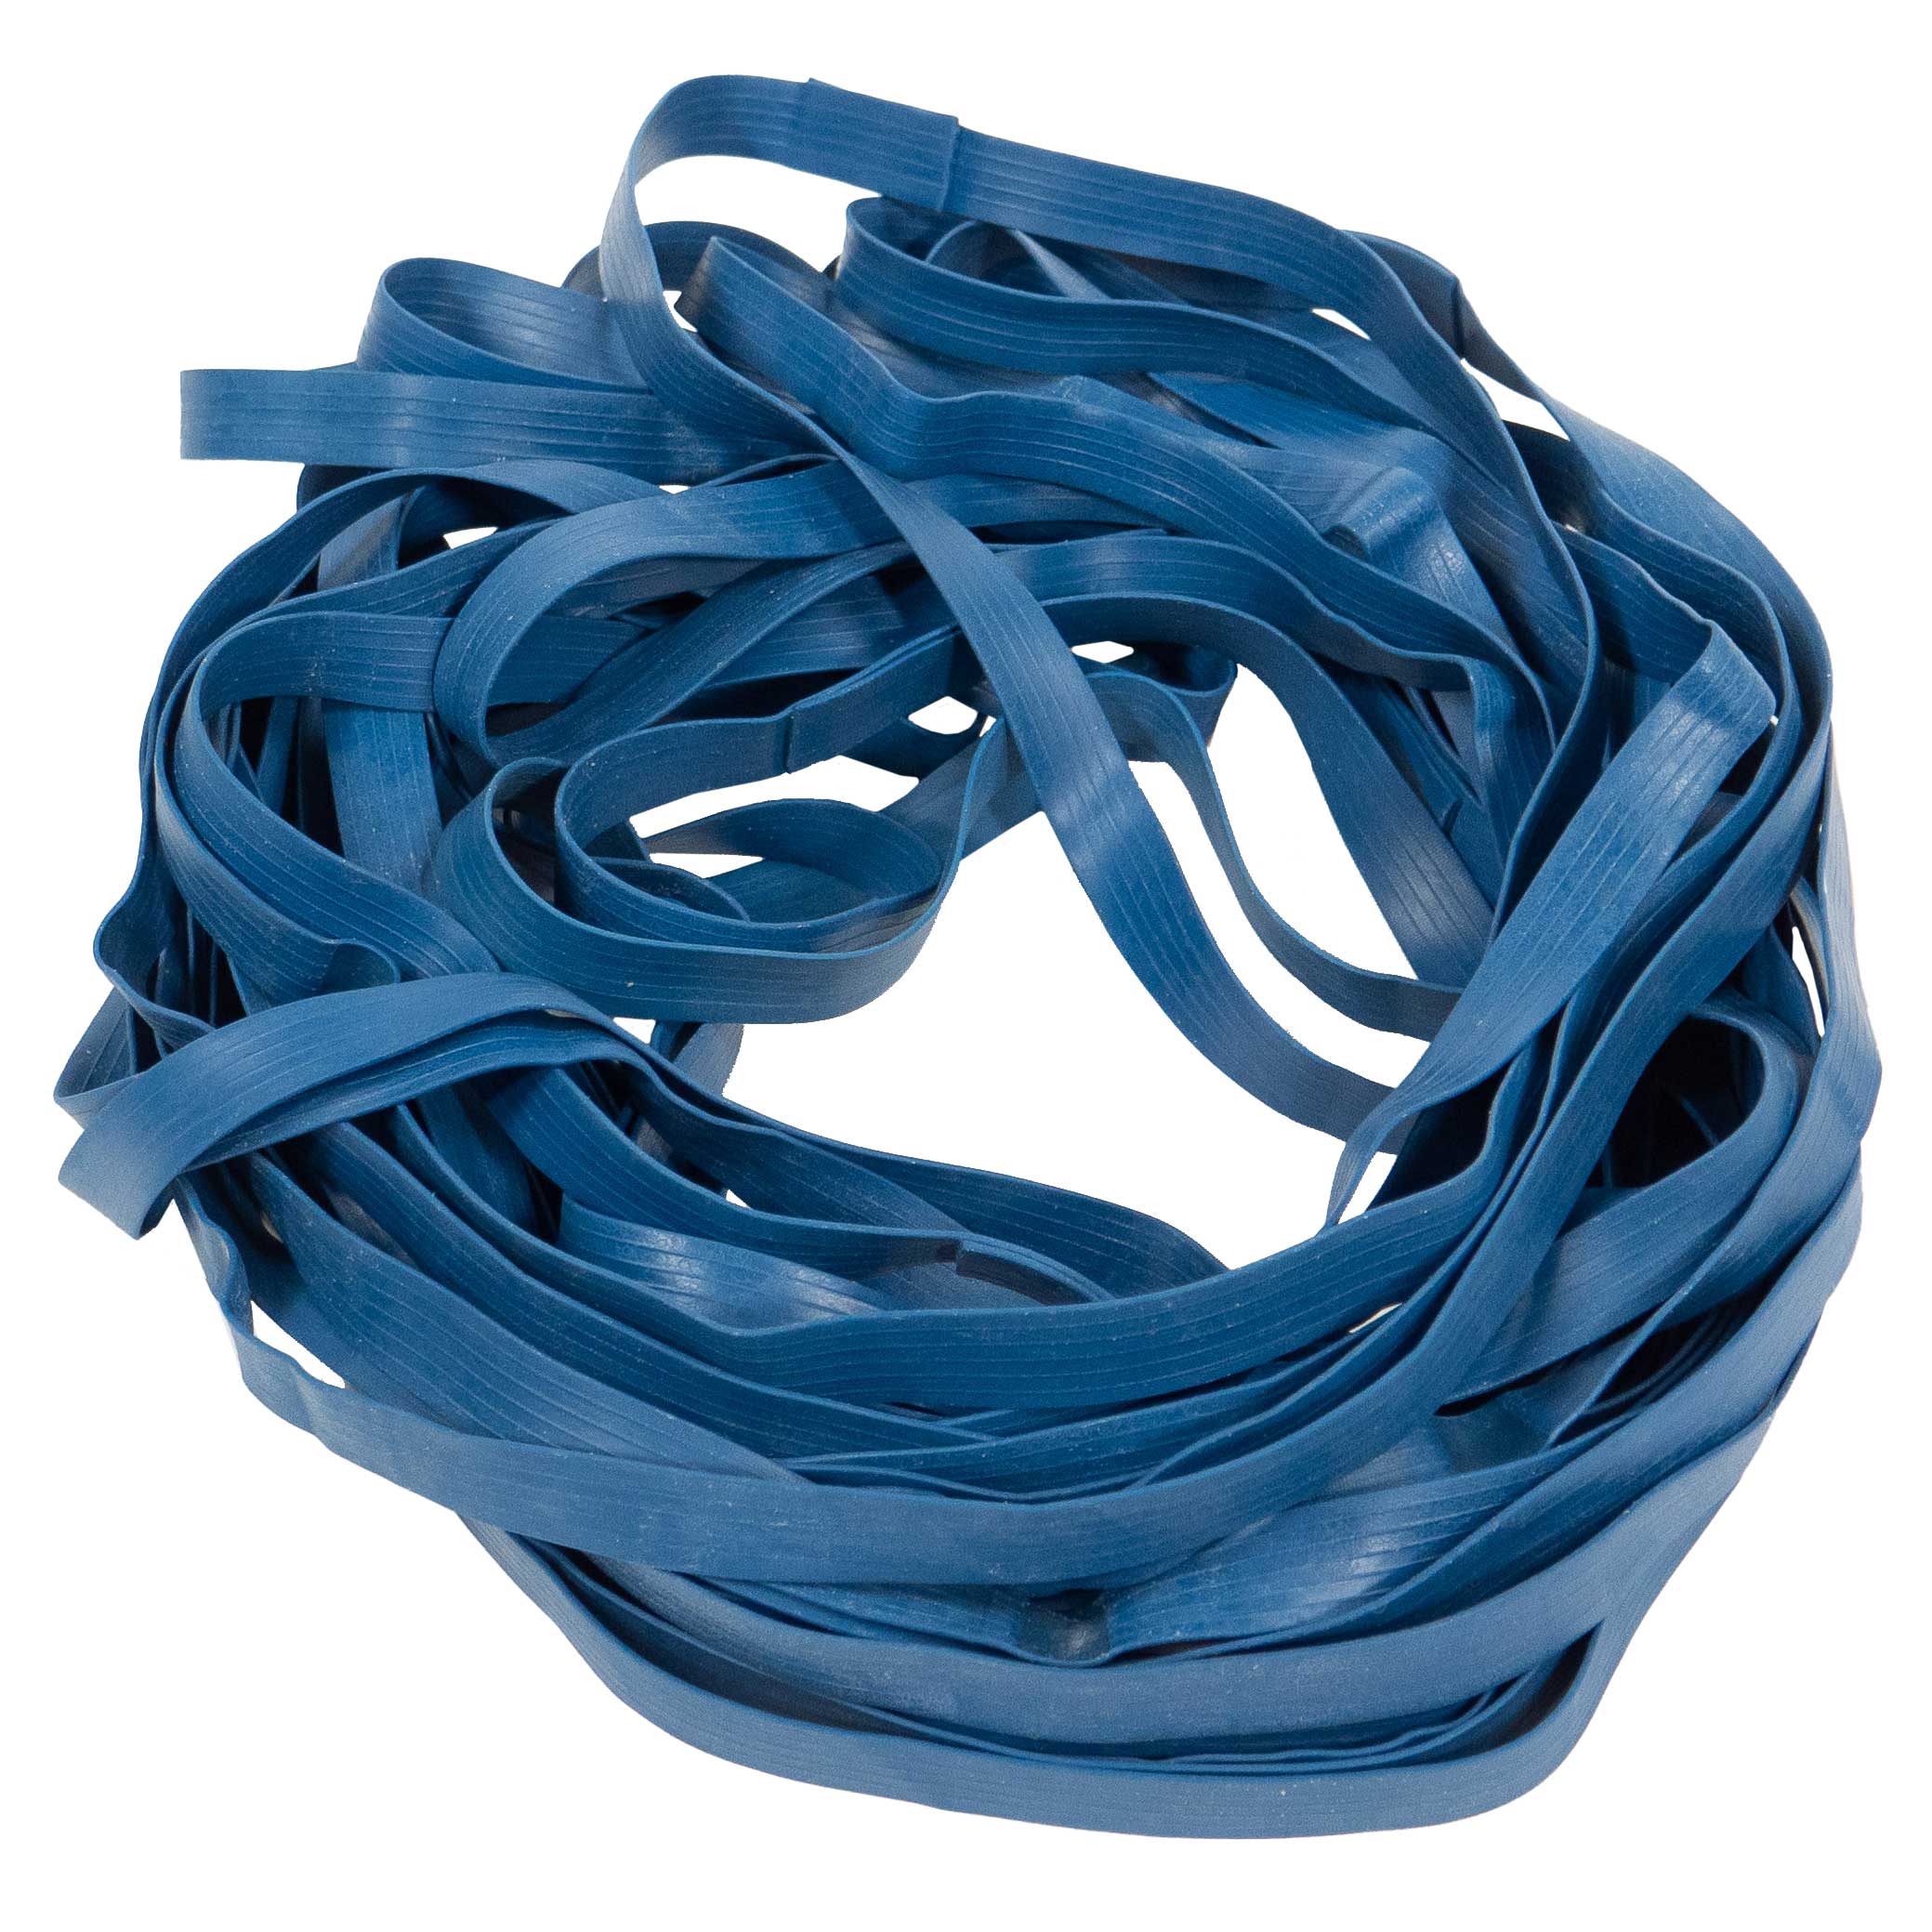 US Cargo Control RB36 36 Extra Large Rubber Bands, 1 Dozen